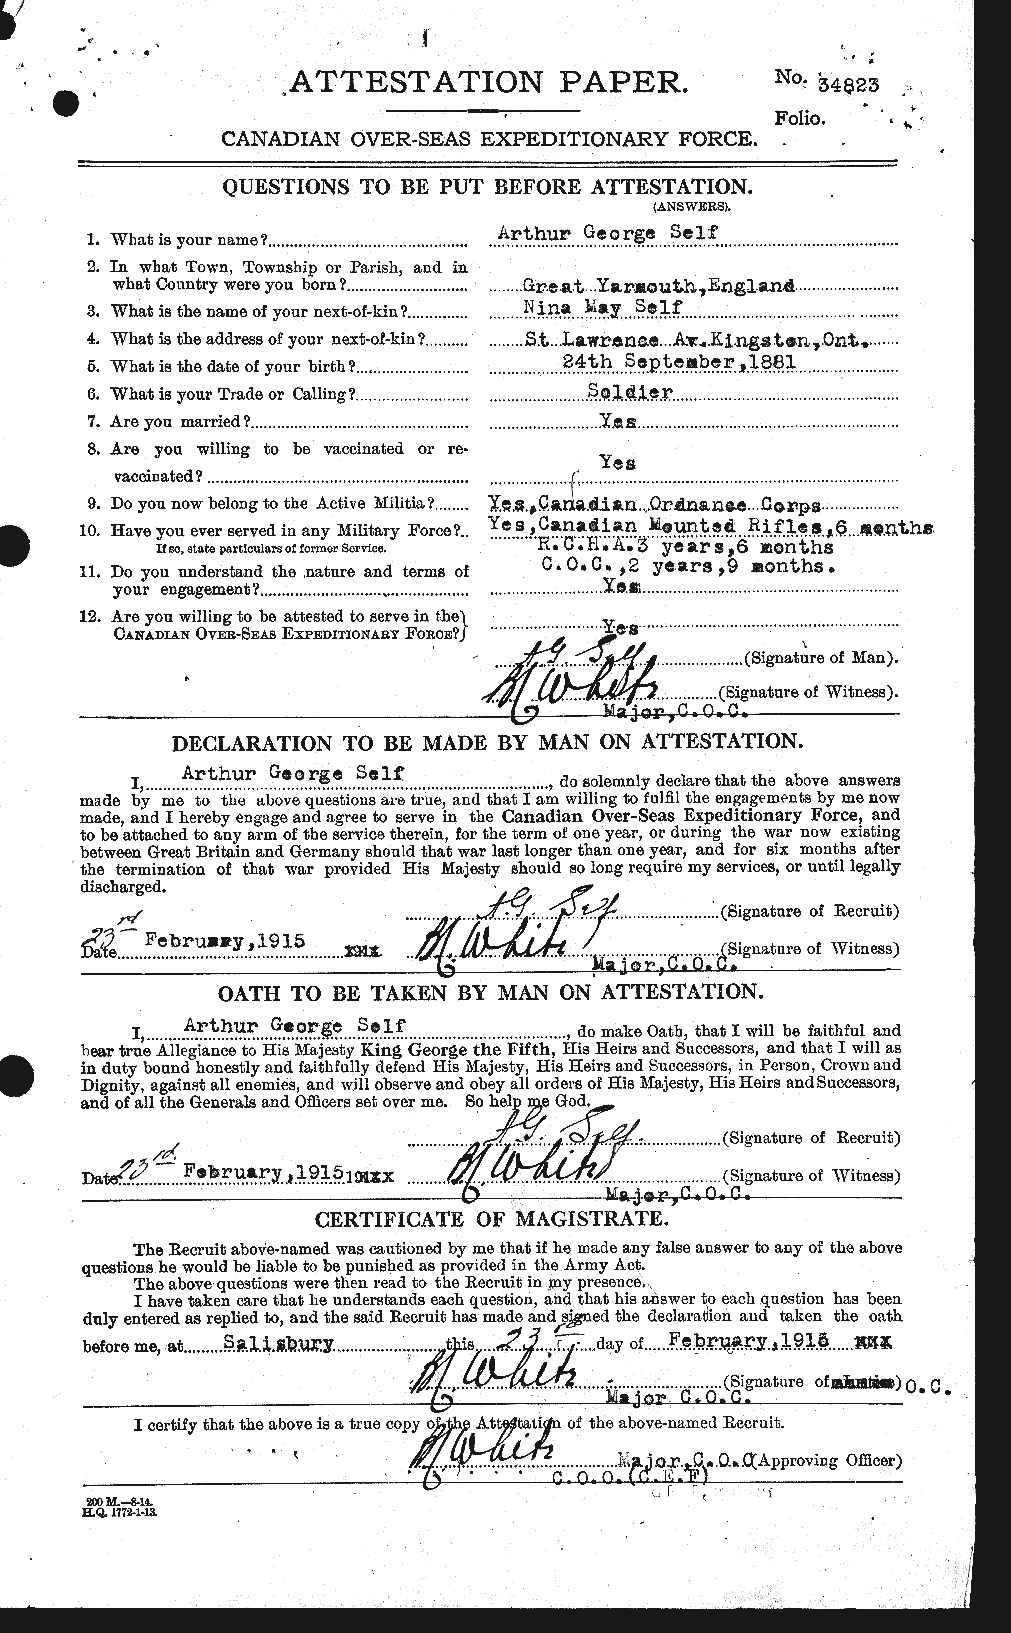 Personnel Records of the First World War - CEF 088384a